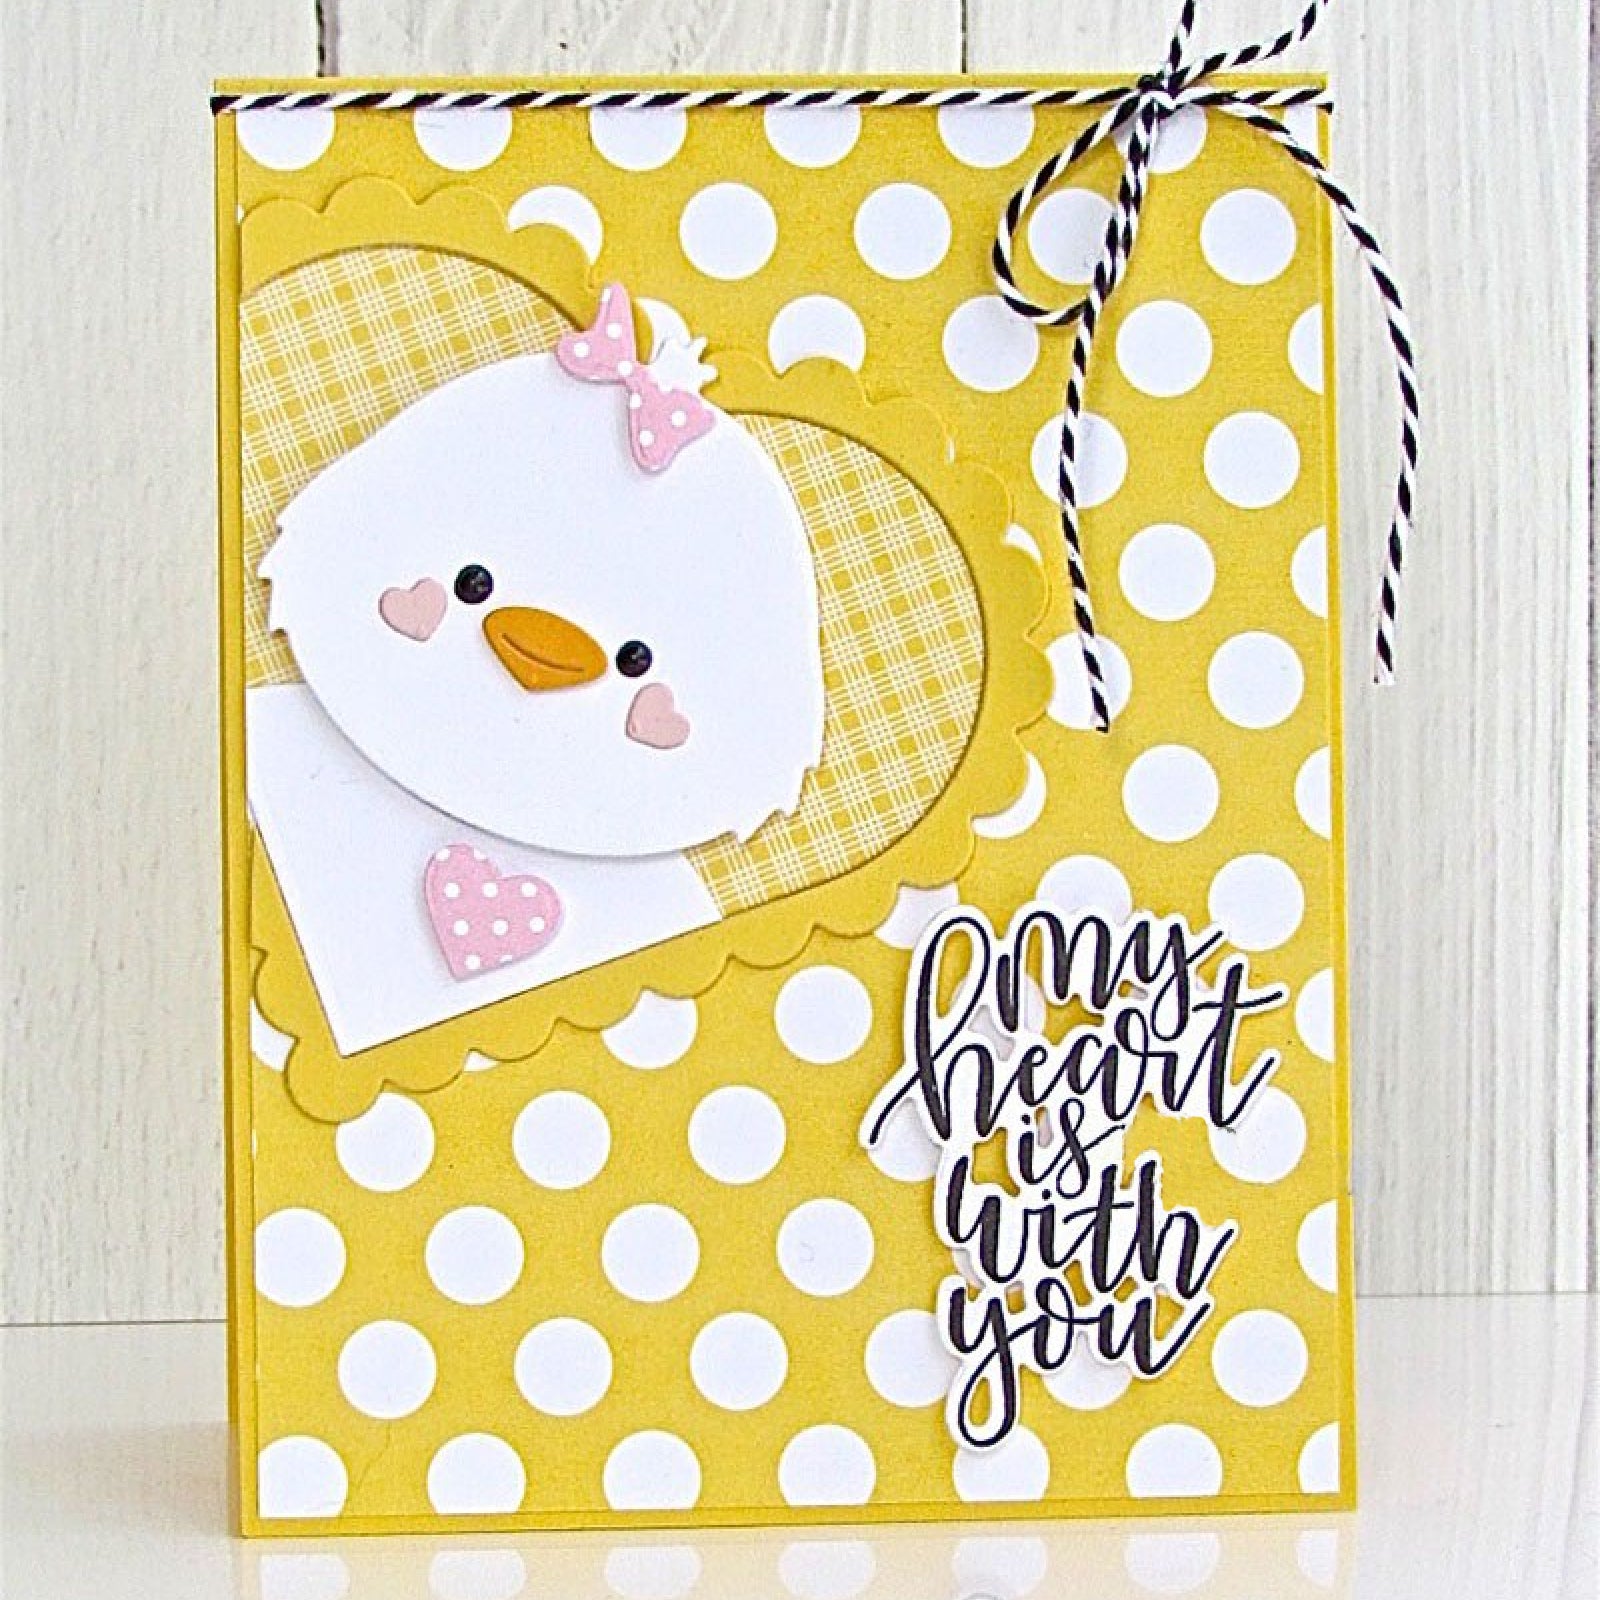 Easter Bunny / Chick w Egg & Carrot Cutting & Embossing Dies